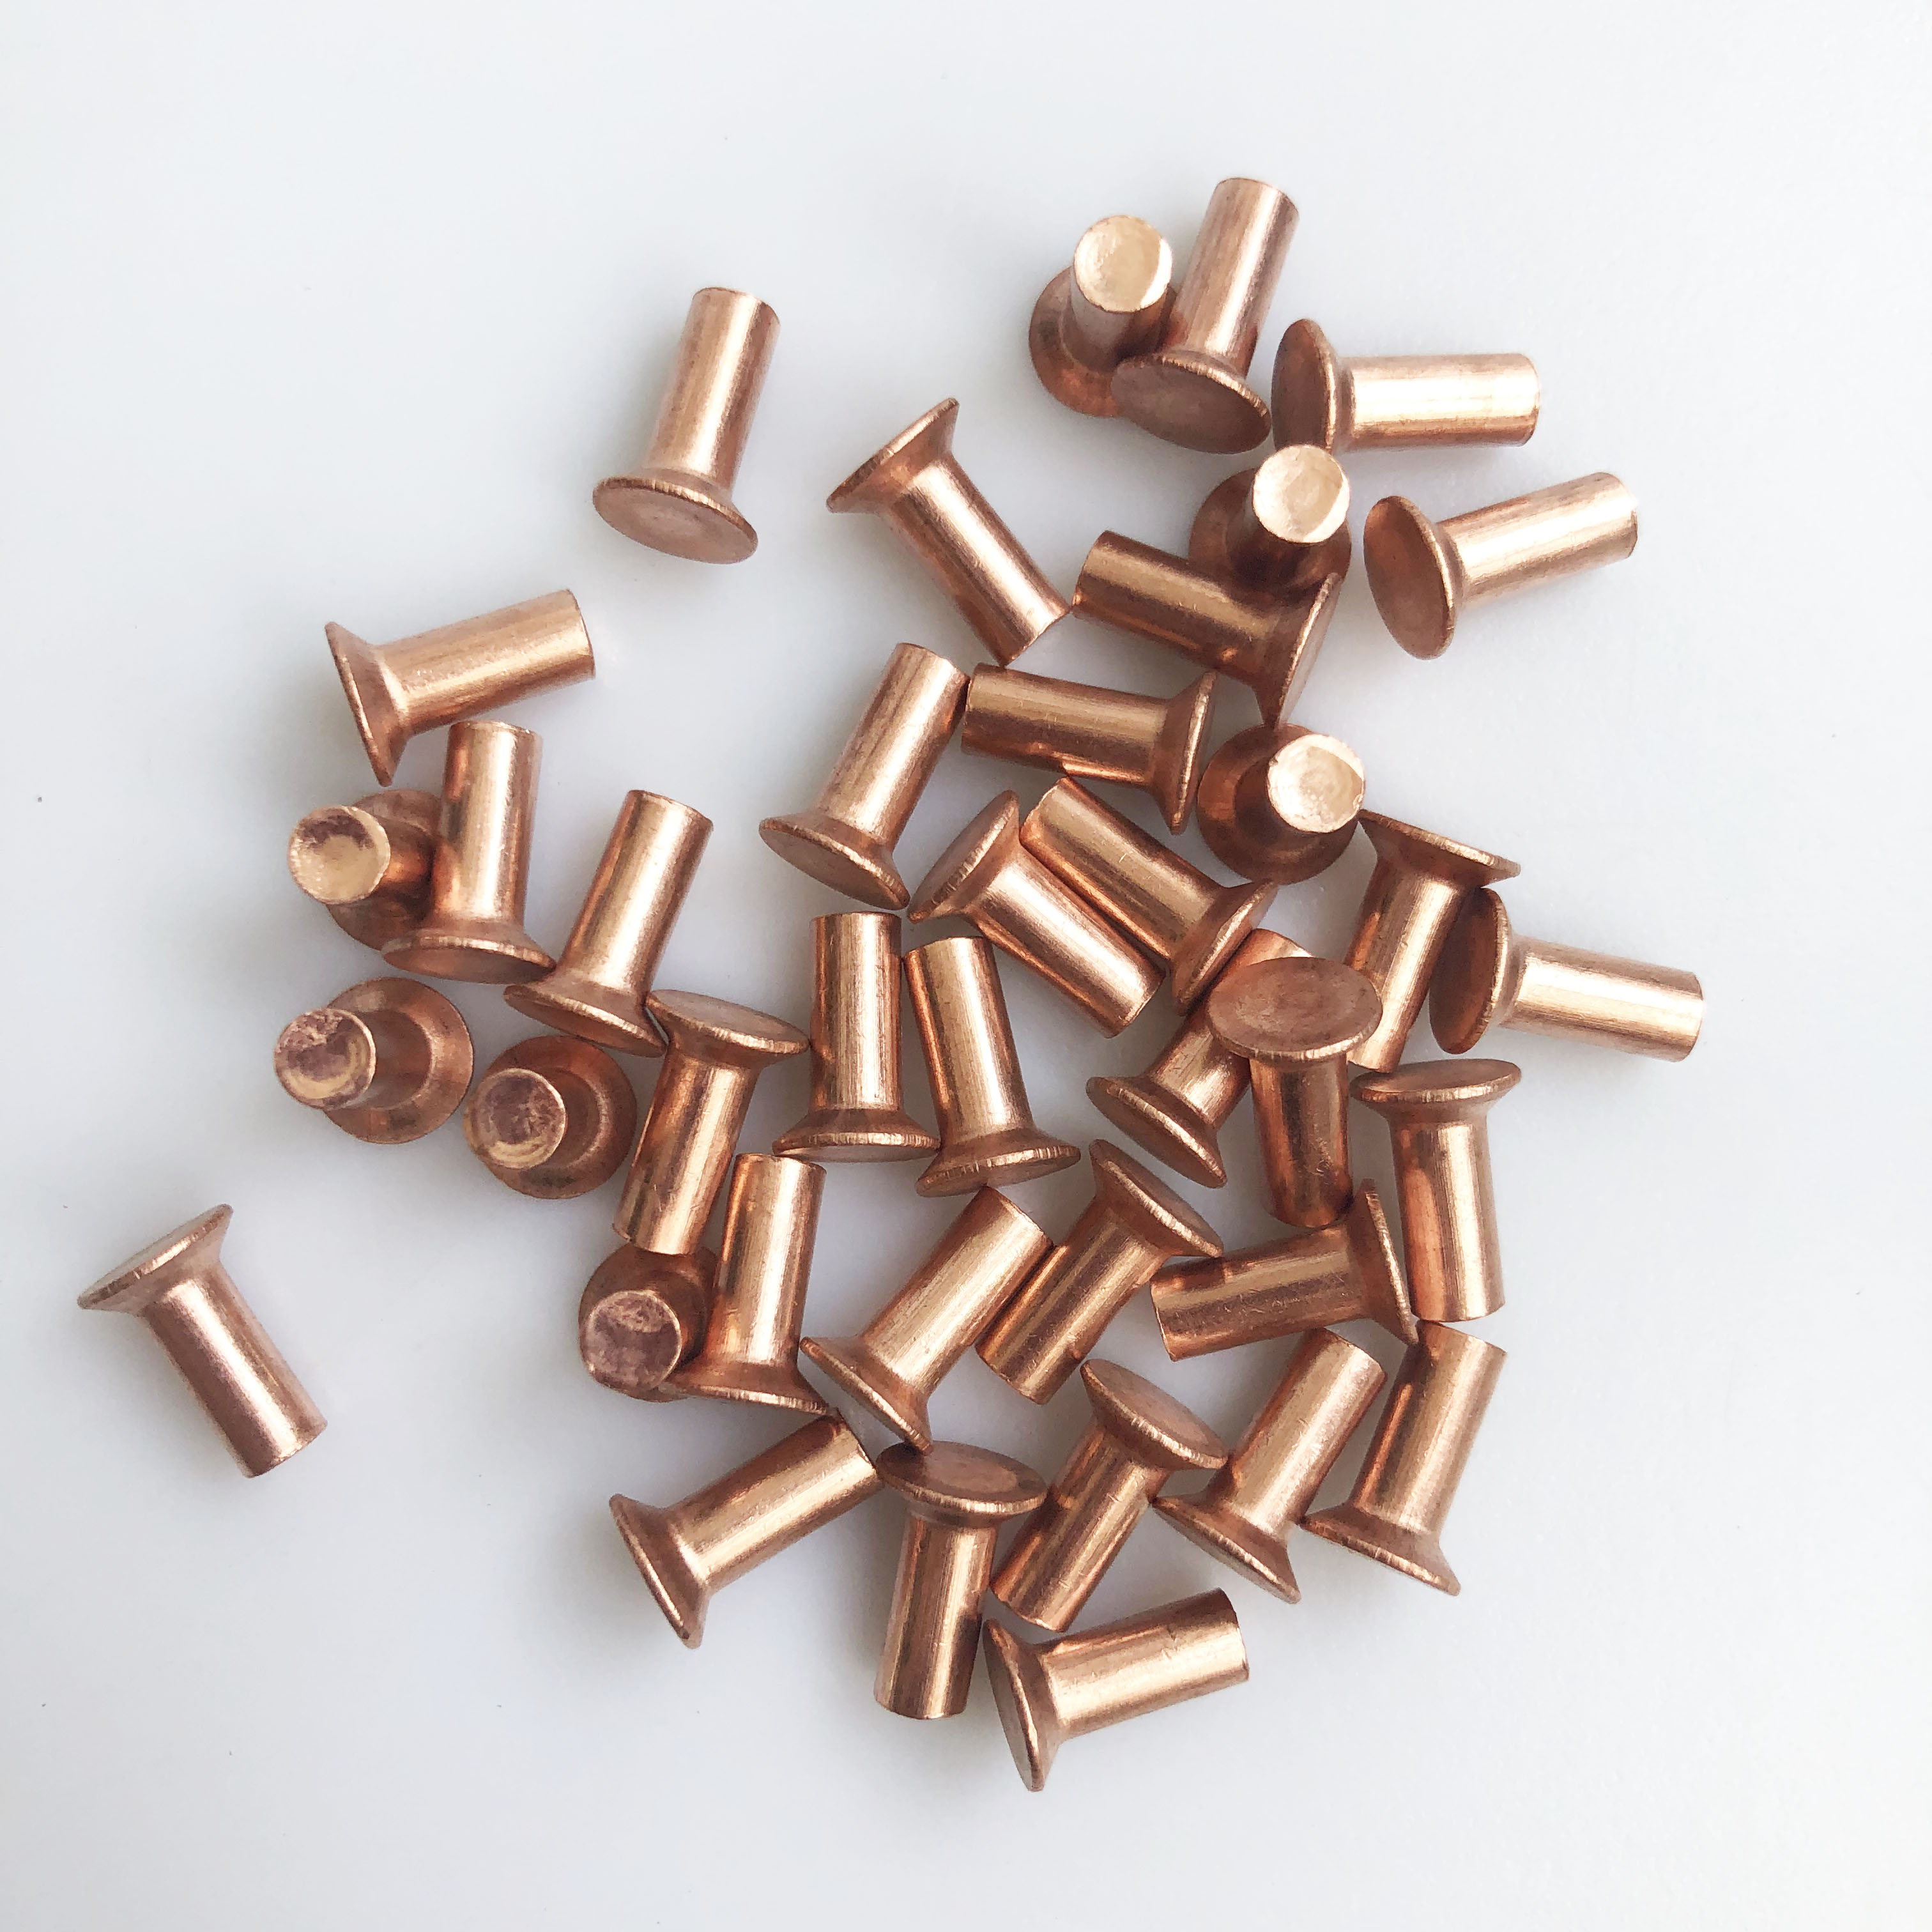 Copper Roves (Copper Rivets) for Wooden Boat Building - China